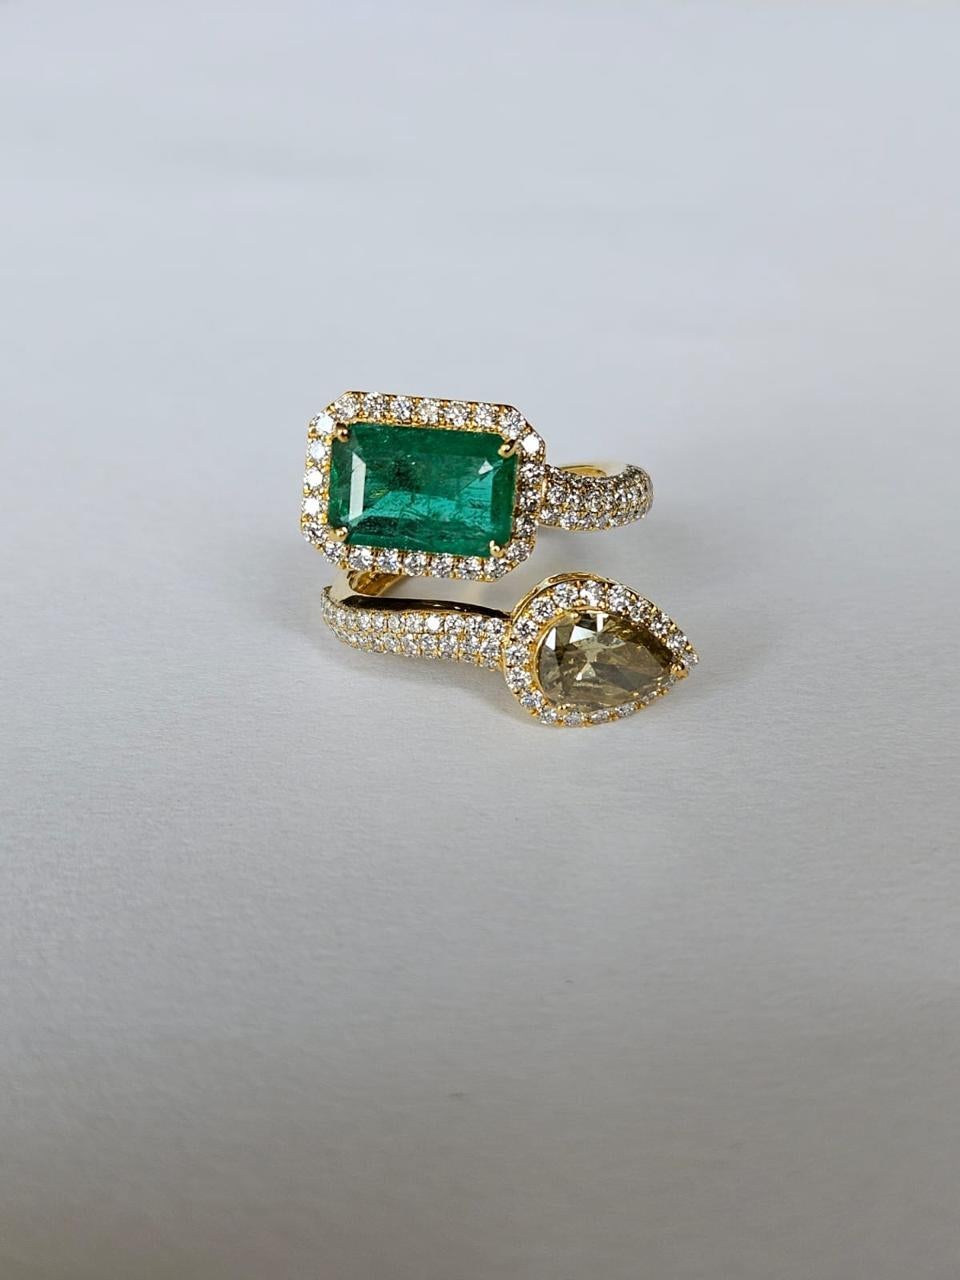 Set in 18K Gold, 2.34 carats, natural Zambian Emerald & Diamonds Engagement Ring For Sale 3